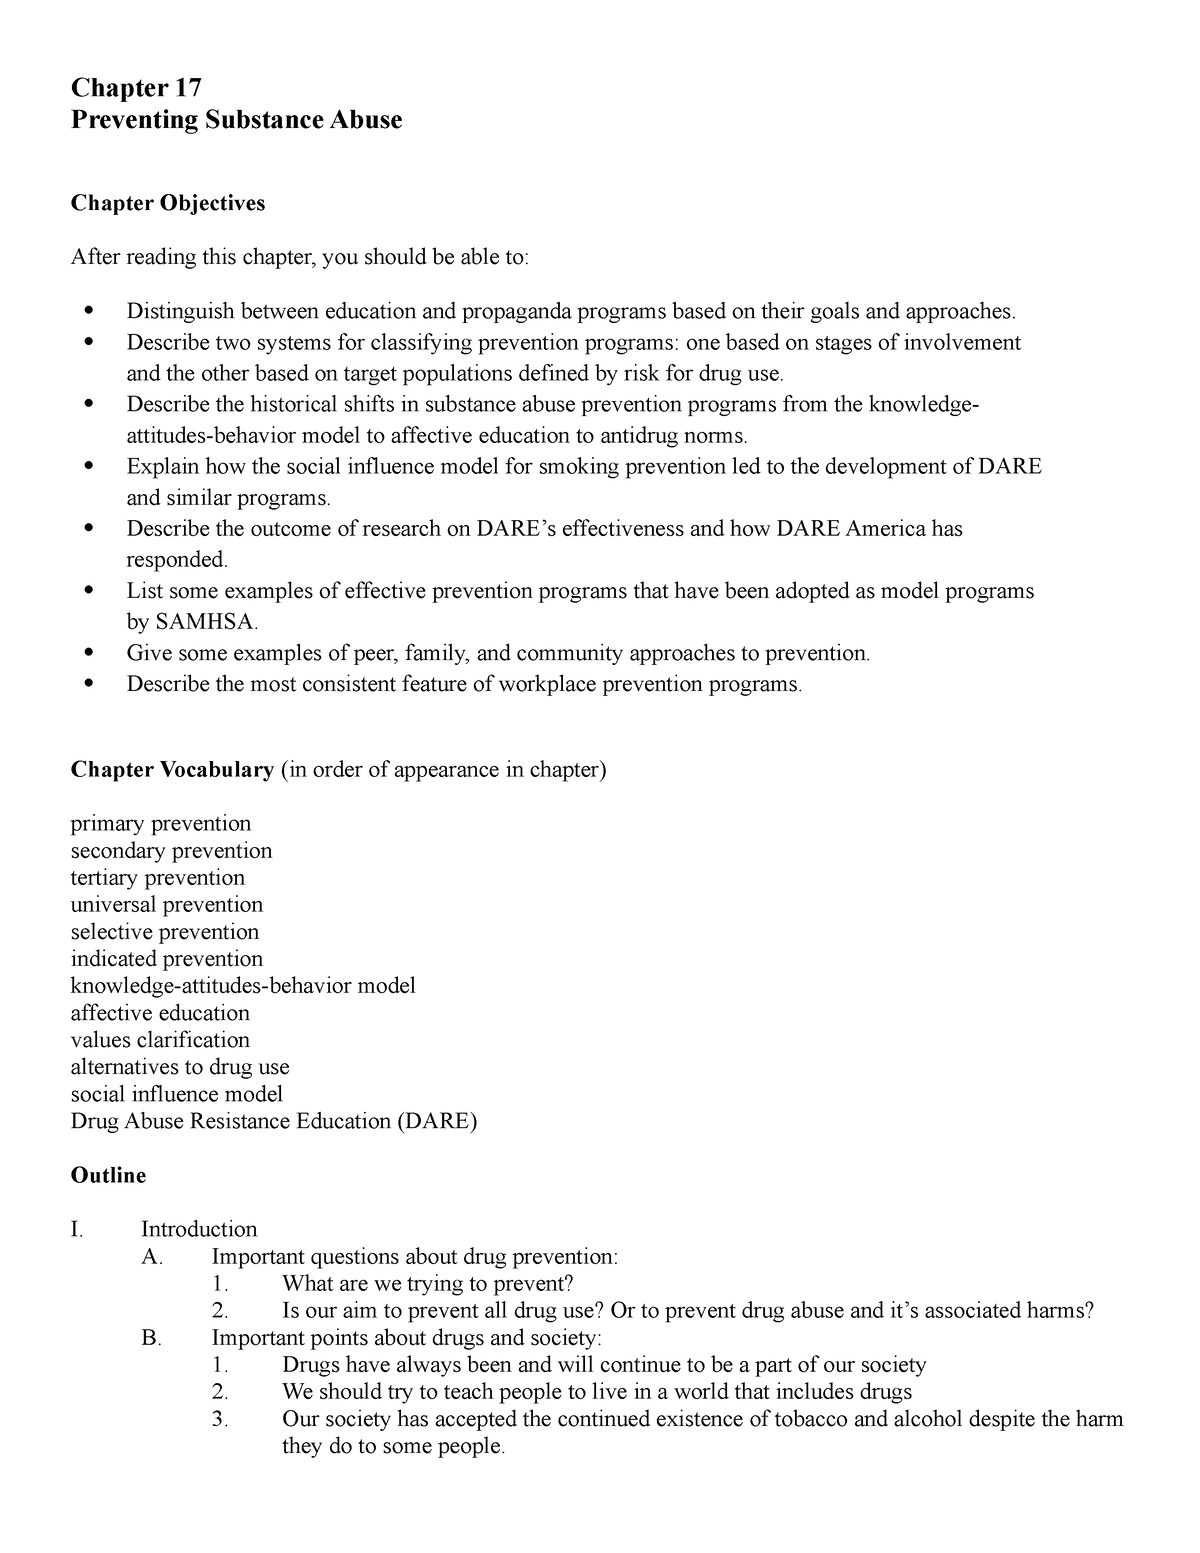 Chapter 17 Objectives Vocabulary Outline Key Points - Chapter 17 ...